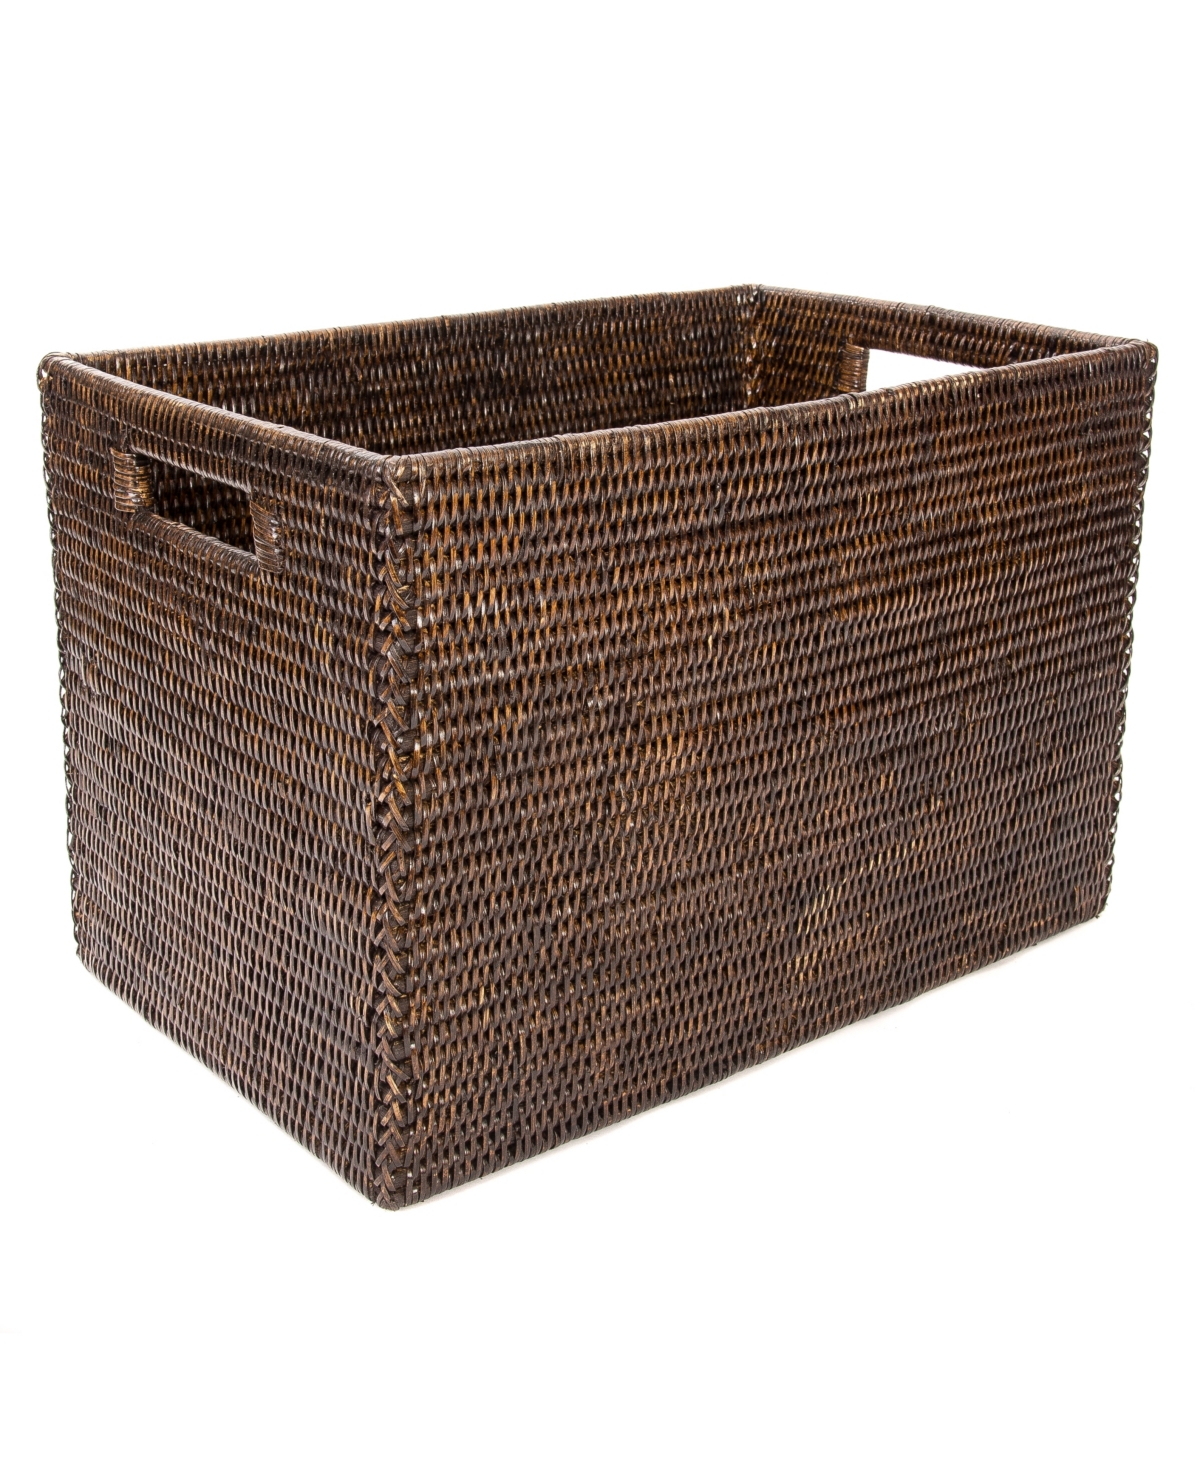 Artifacts Trading Company Artifacts Rattan Storage Box Legal File In Coffee Bean